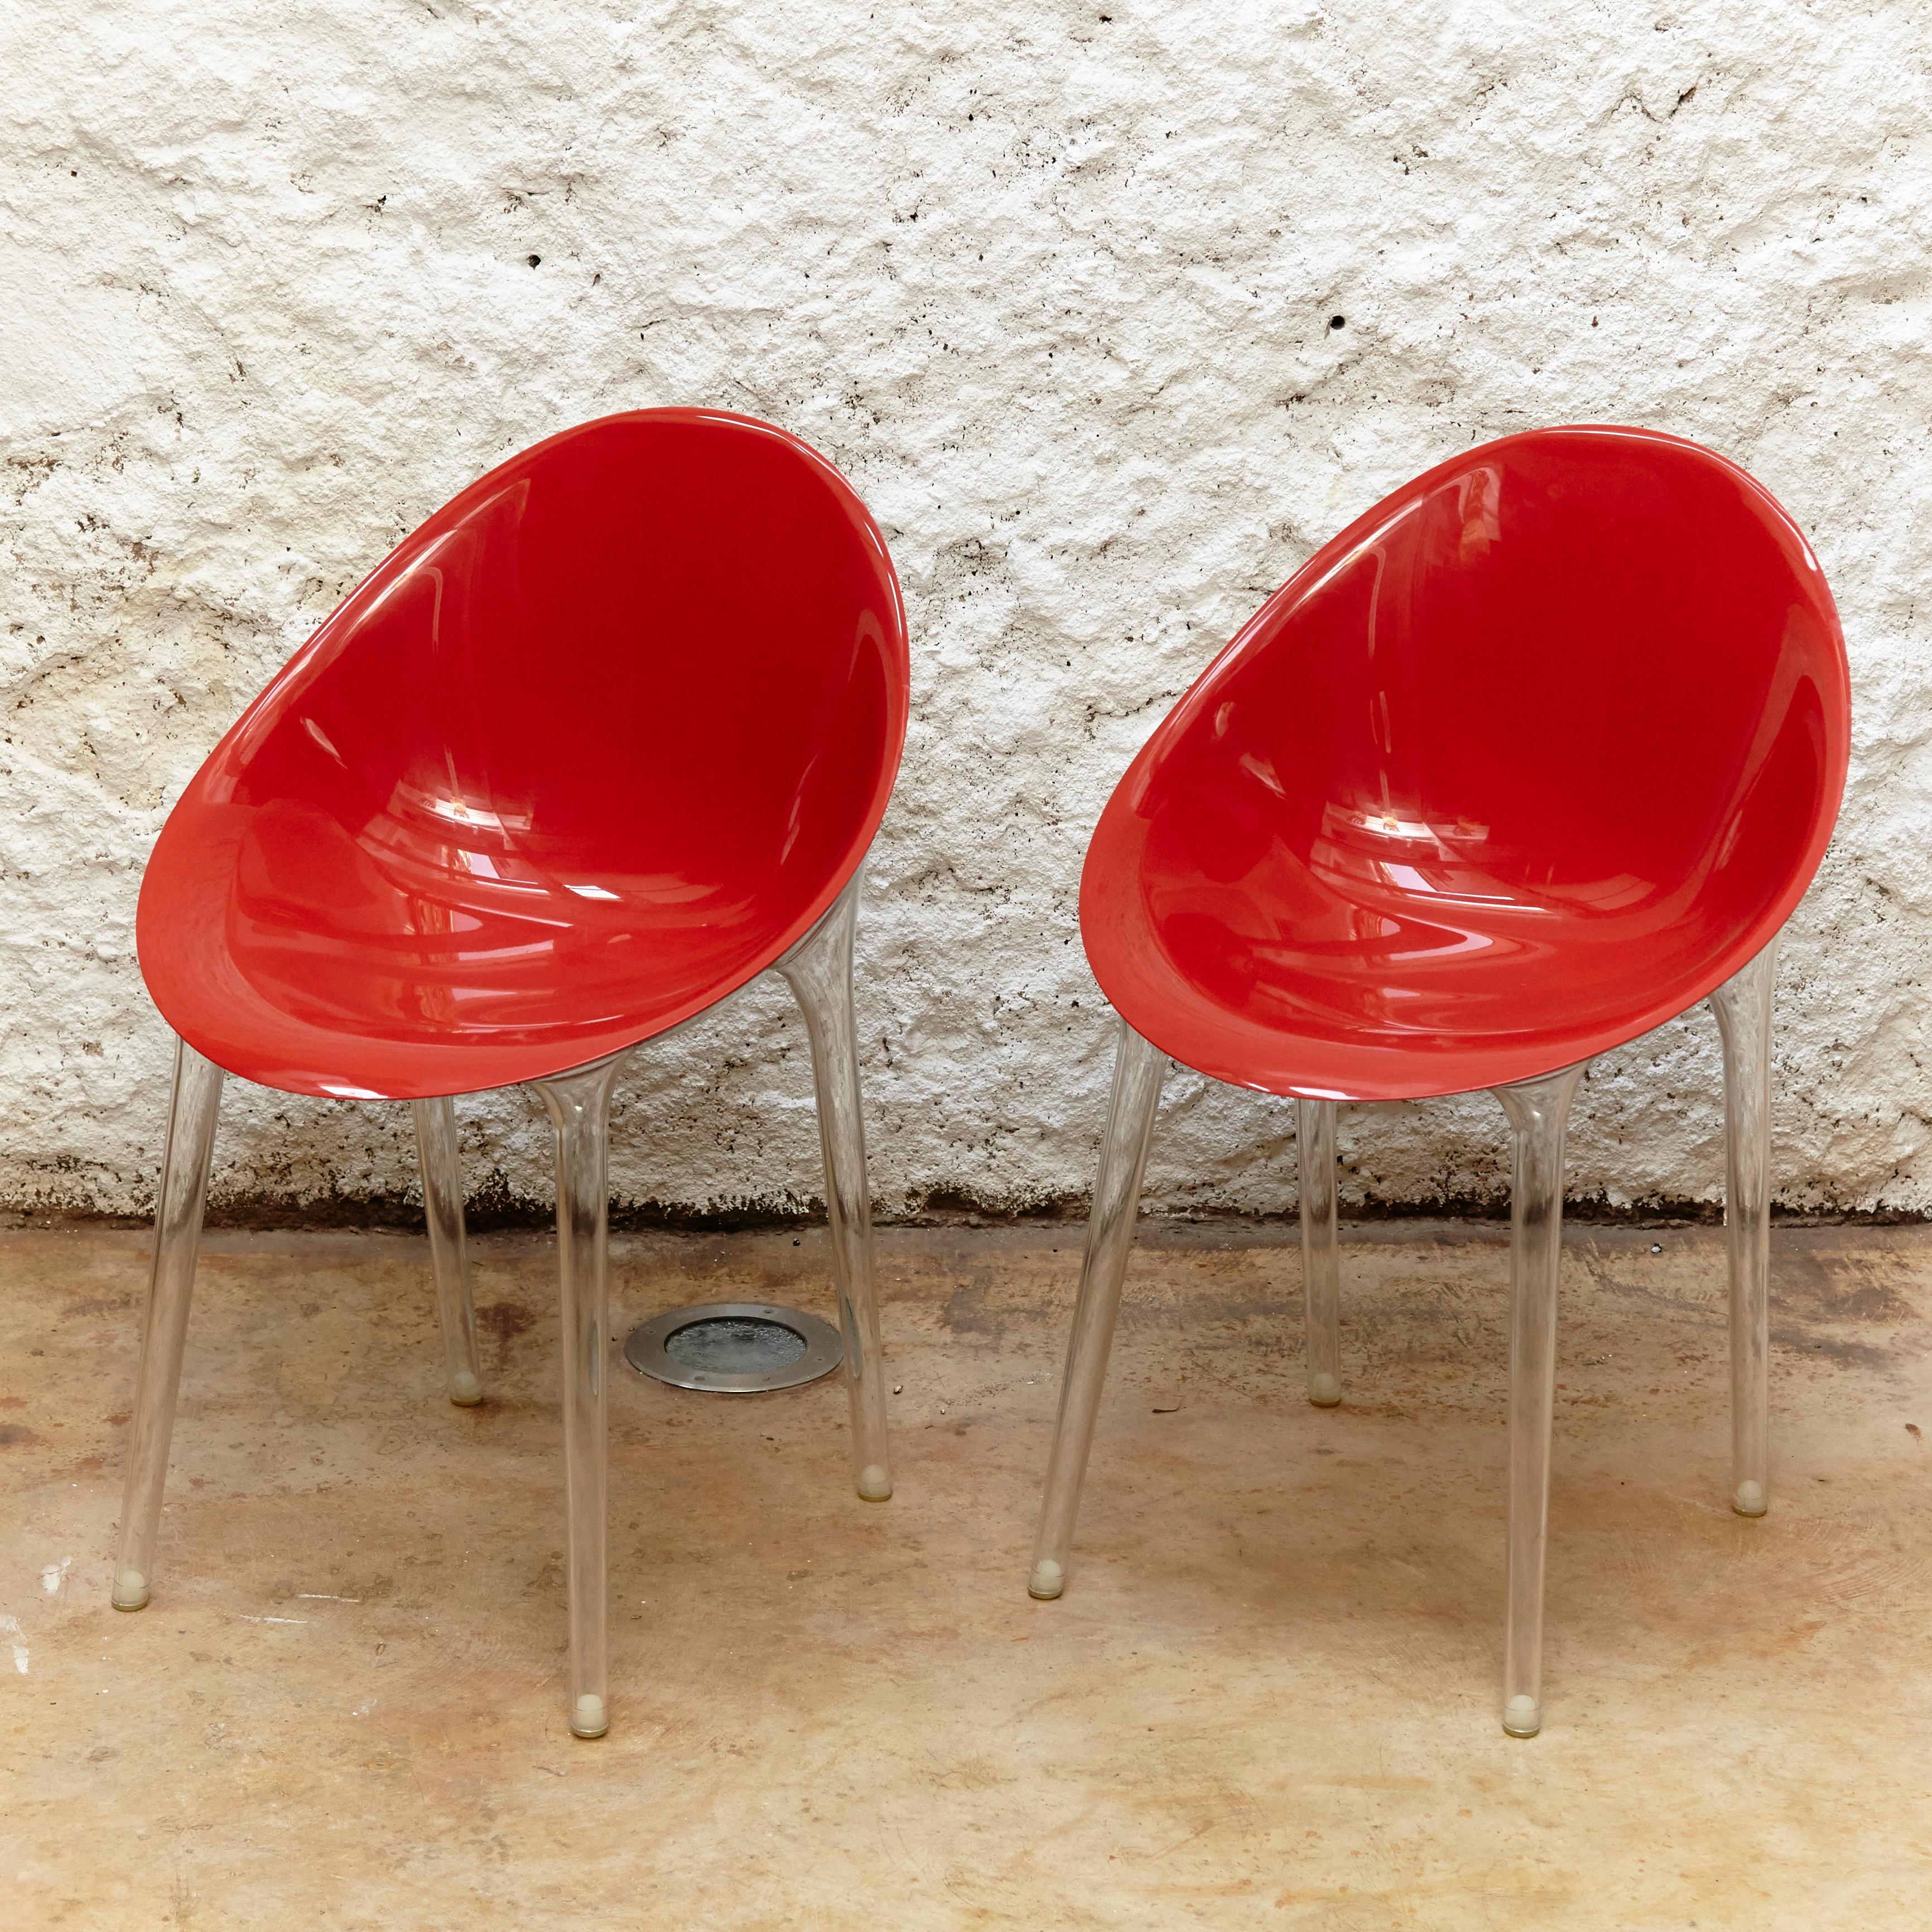 Set of 4 Philippe Starck impossible chair manufactured by Kartell, circa 2018

Measures: H 84 x W 55 x D 60 cm.
 